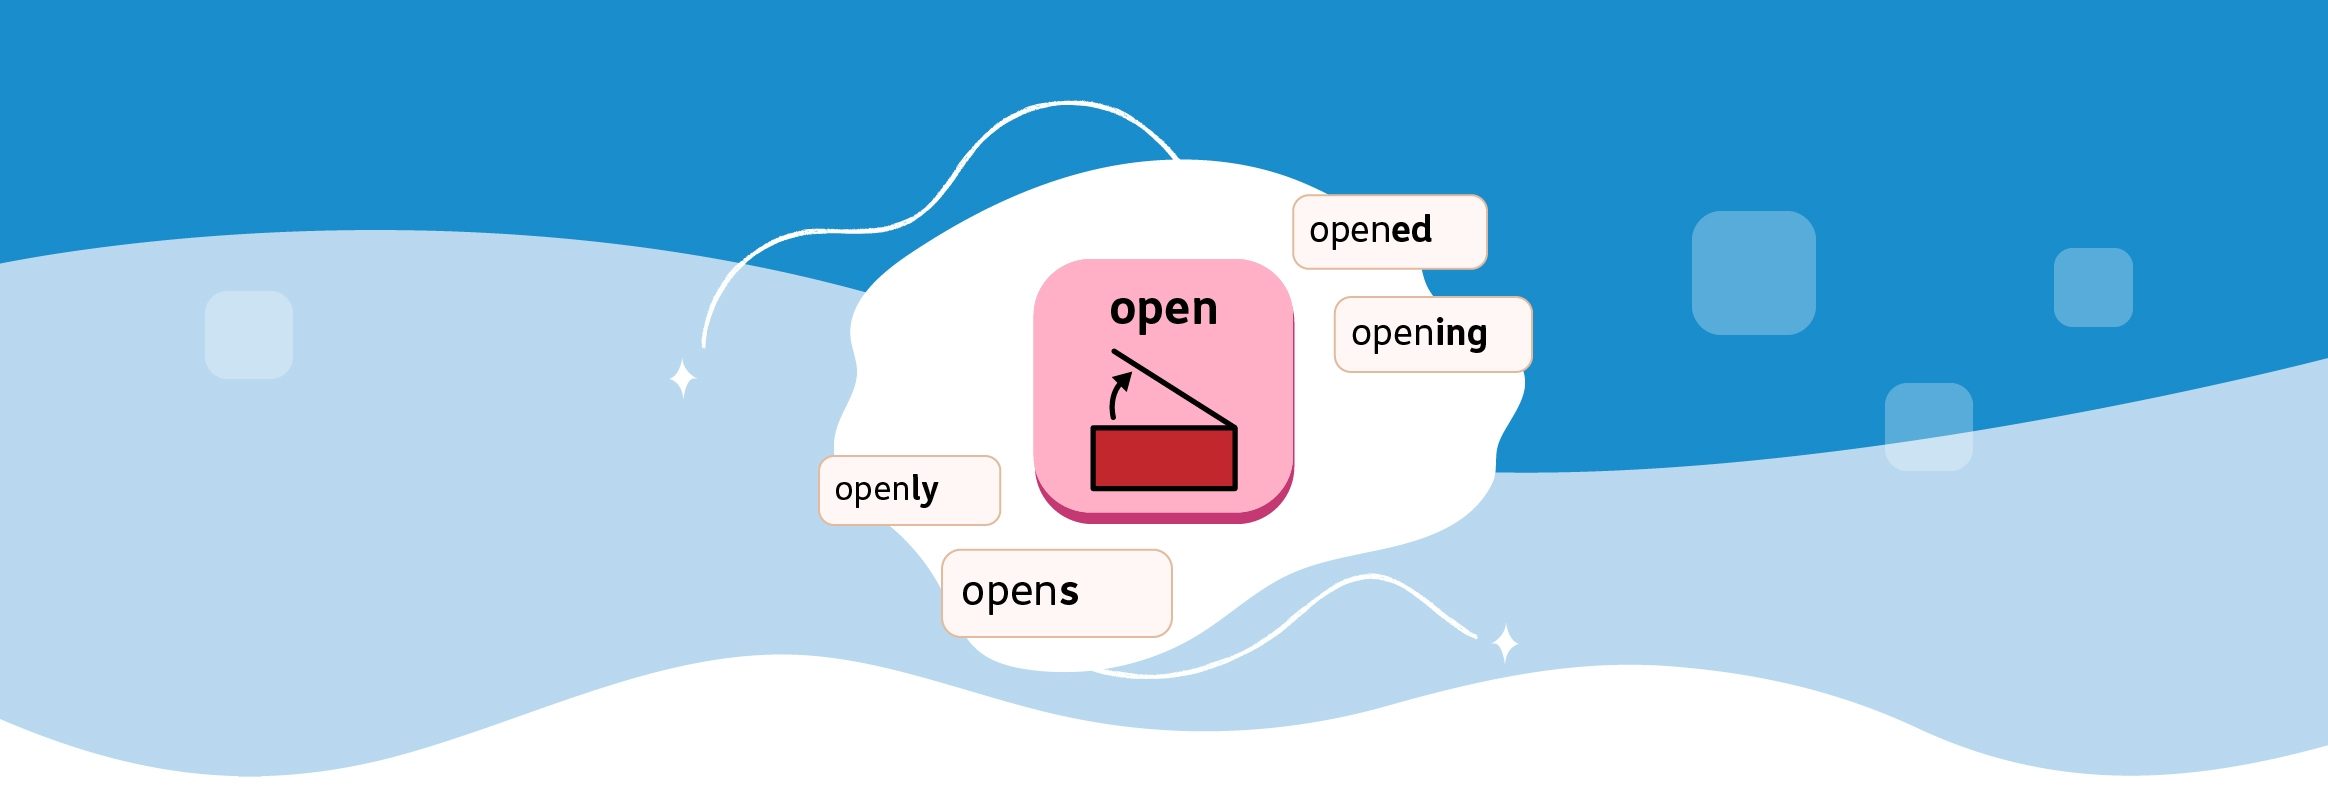 Visual of the "Open" button in Proloquo with different inflections of Open floating as words around the button